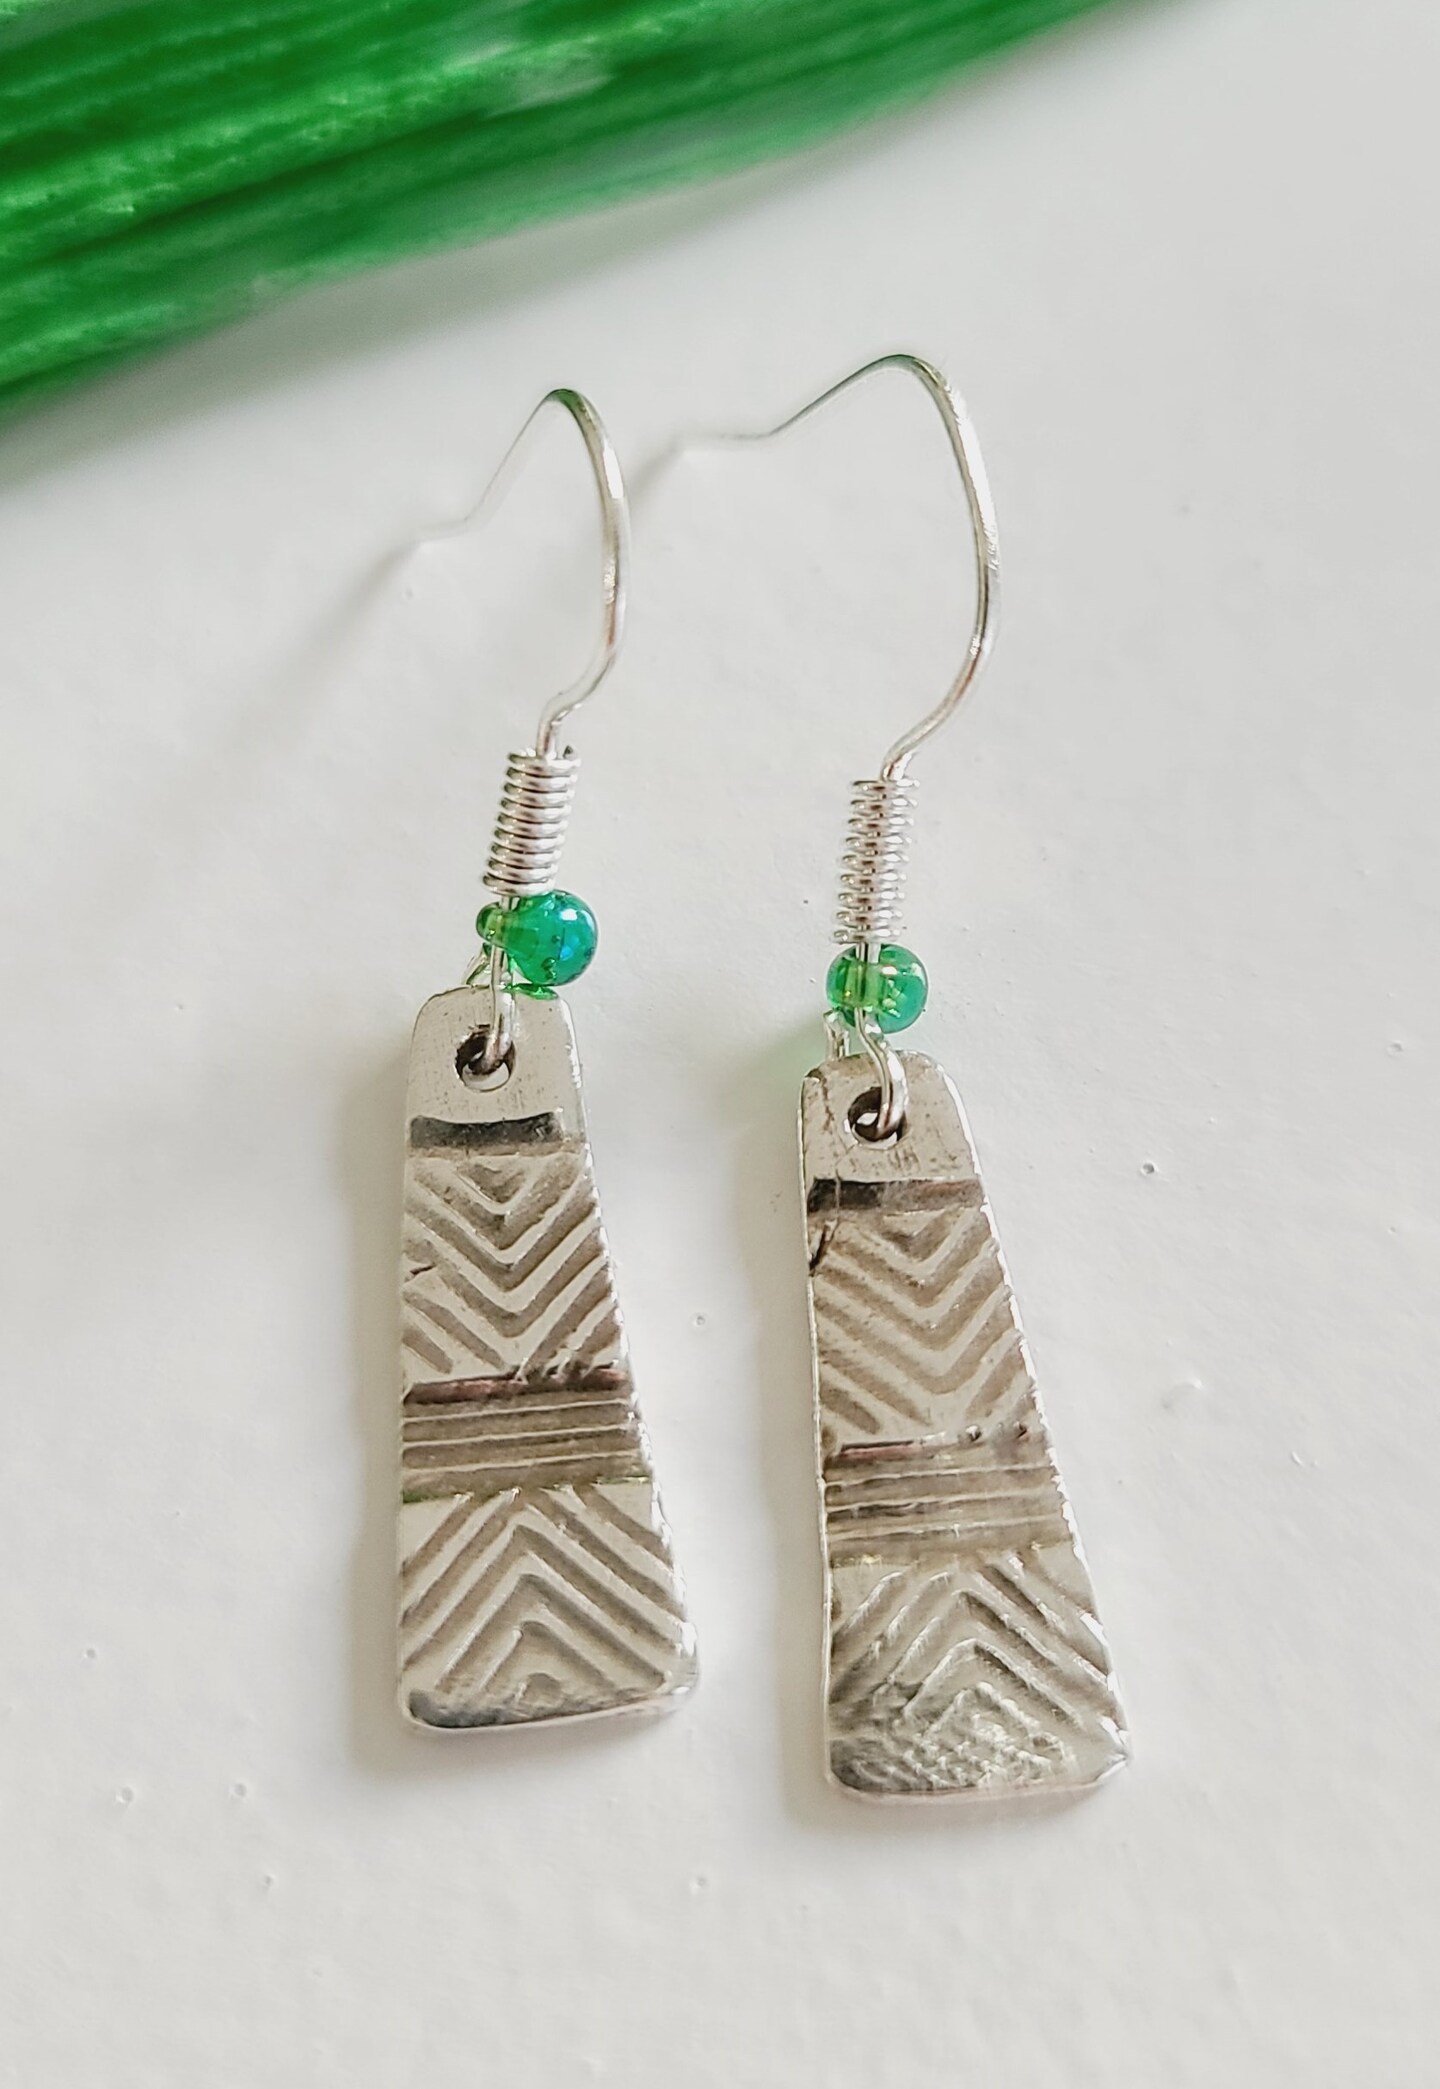 Silver and Gold, Dangle Earrings, Fine Silver Precious Metal Clay (PMC)  Designs, Free Shipping